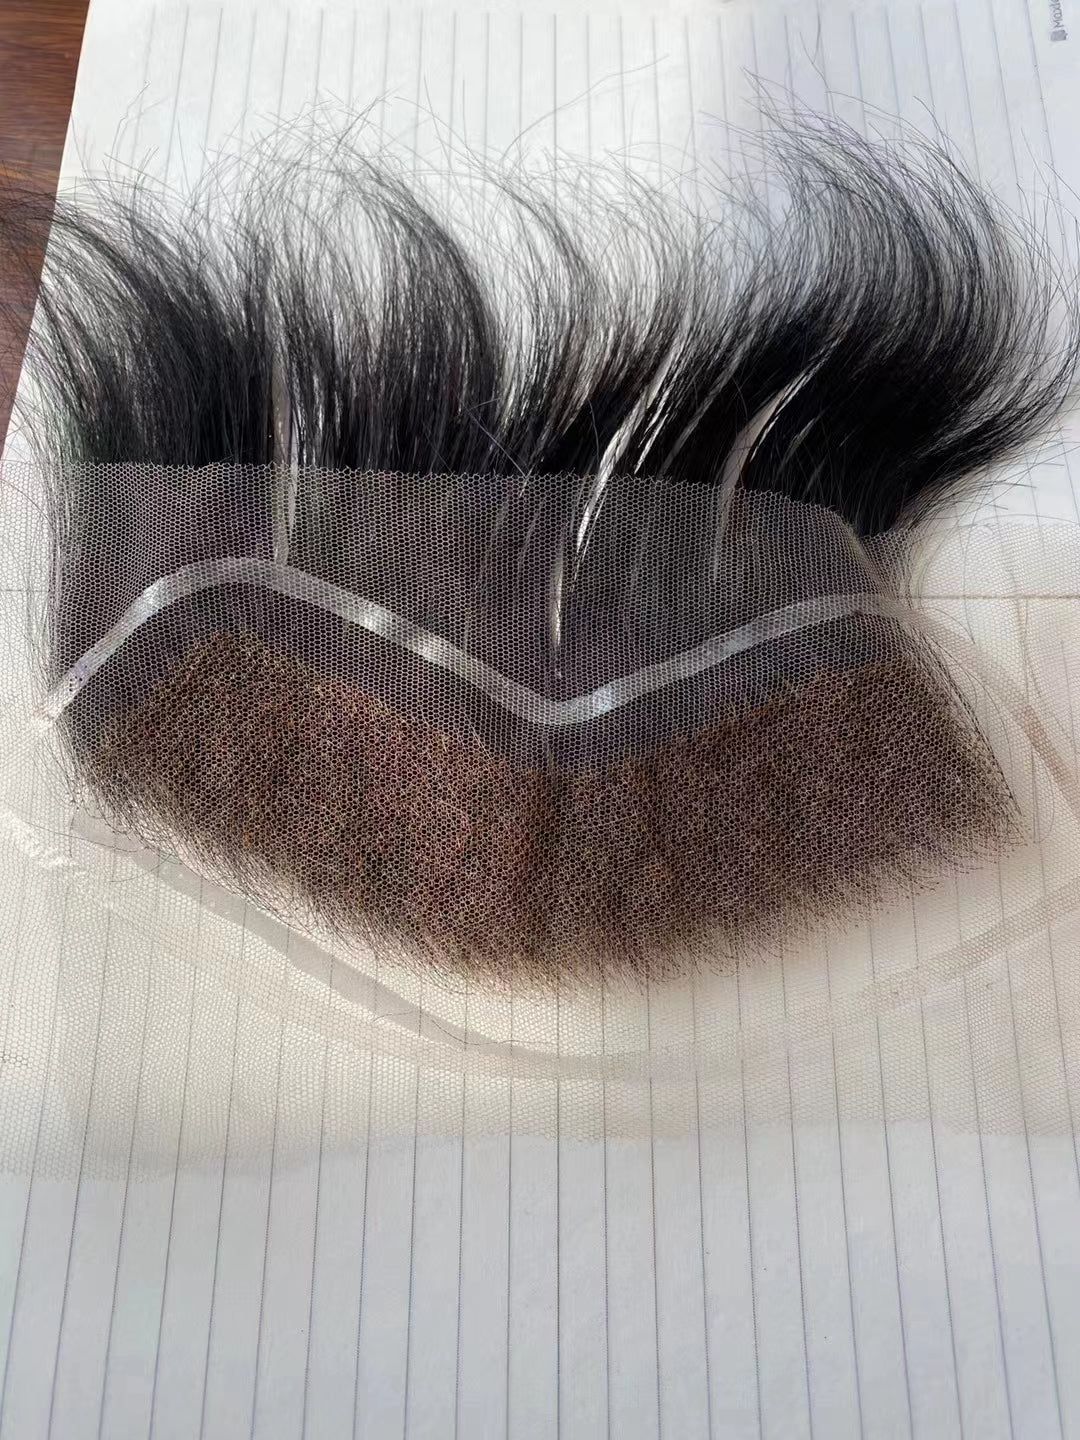 How to connect hair and a lace base